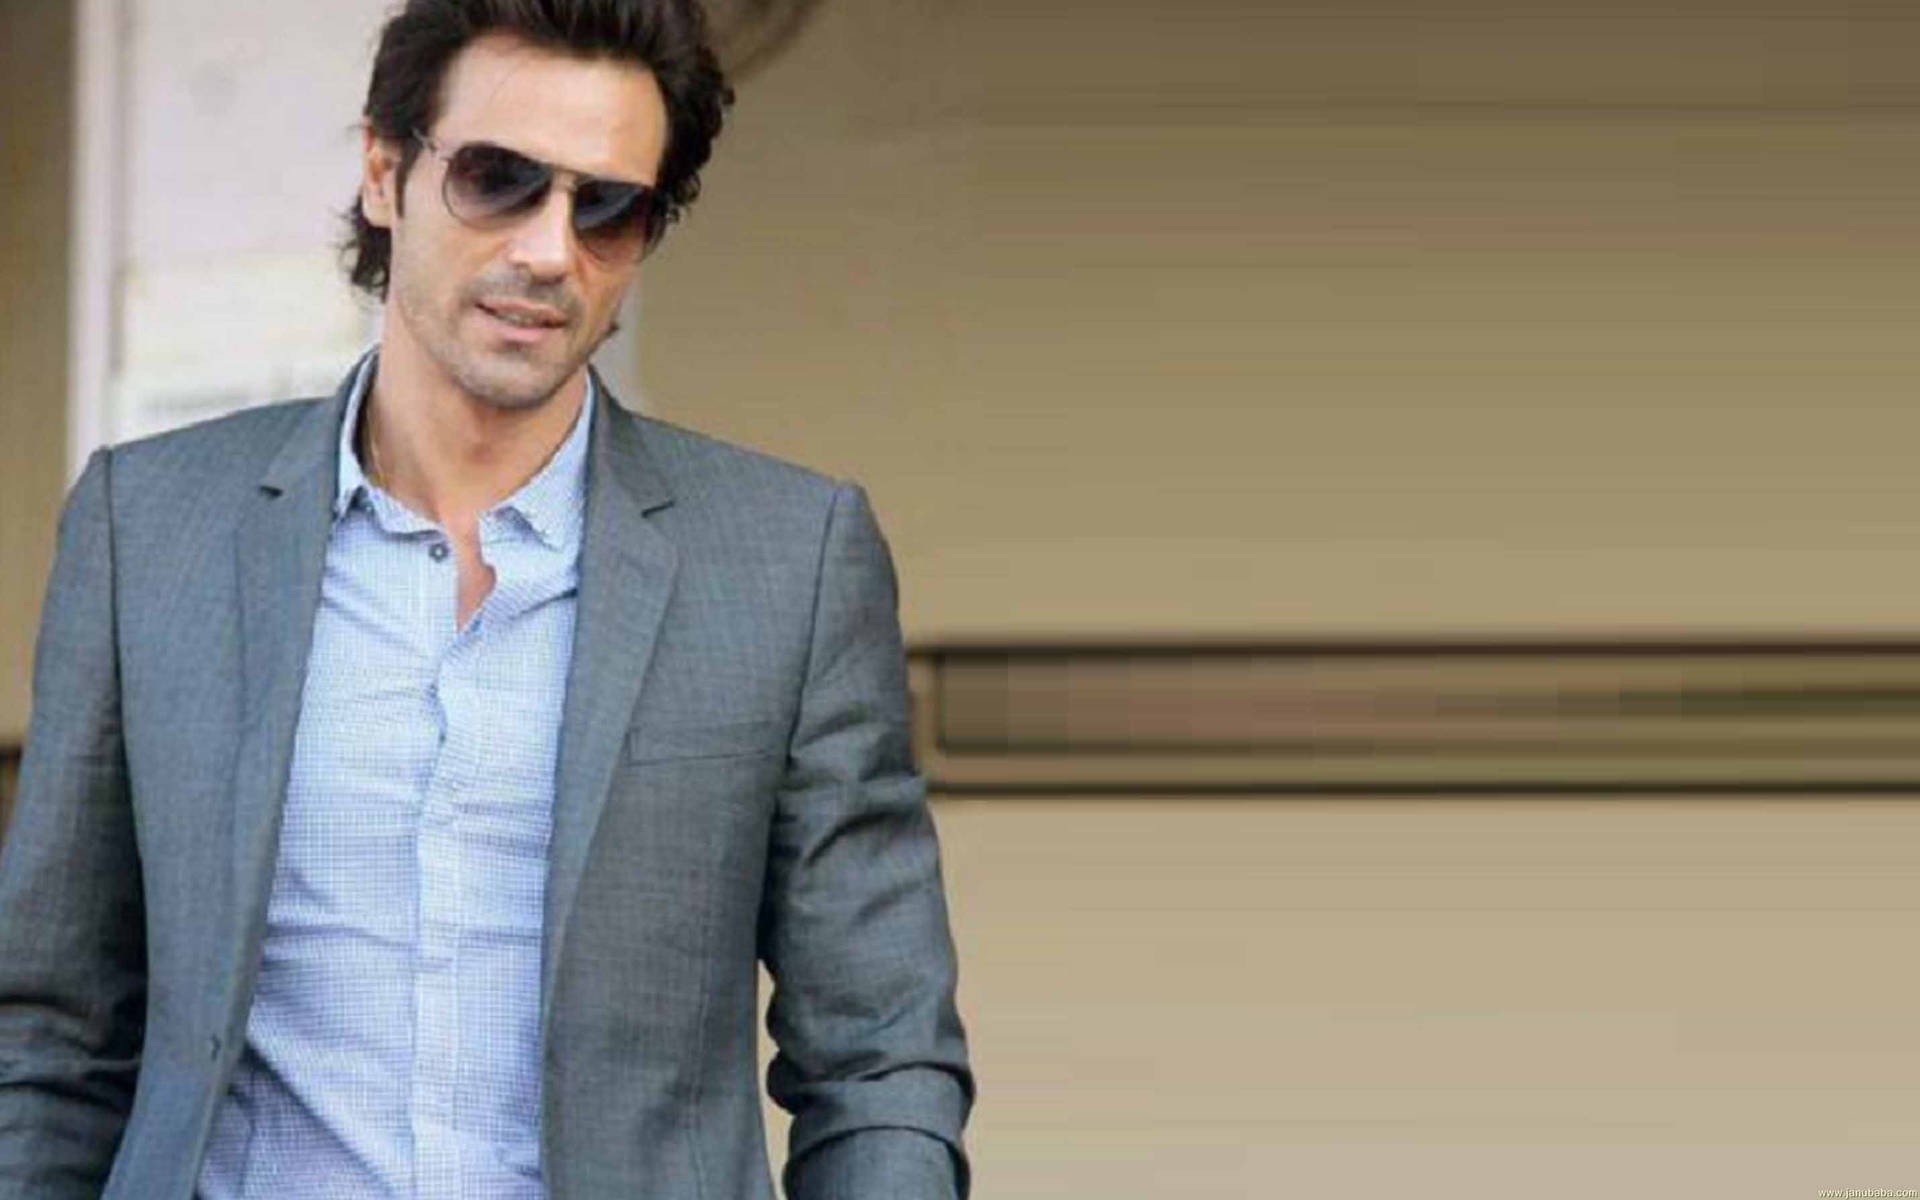 Handsome Arjun Rampal In Business Suit Background